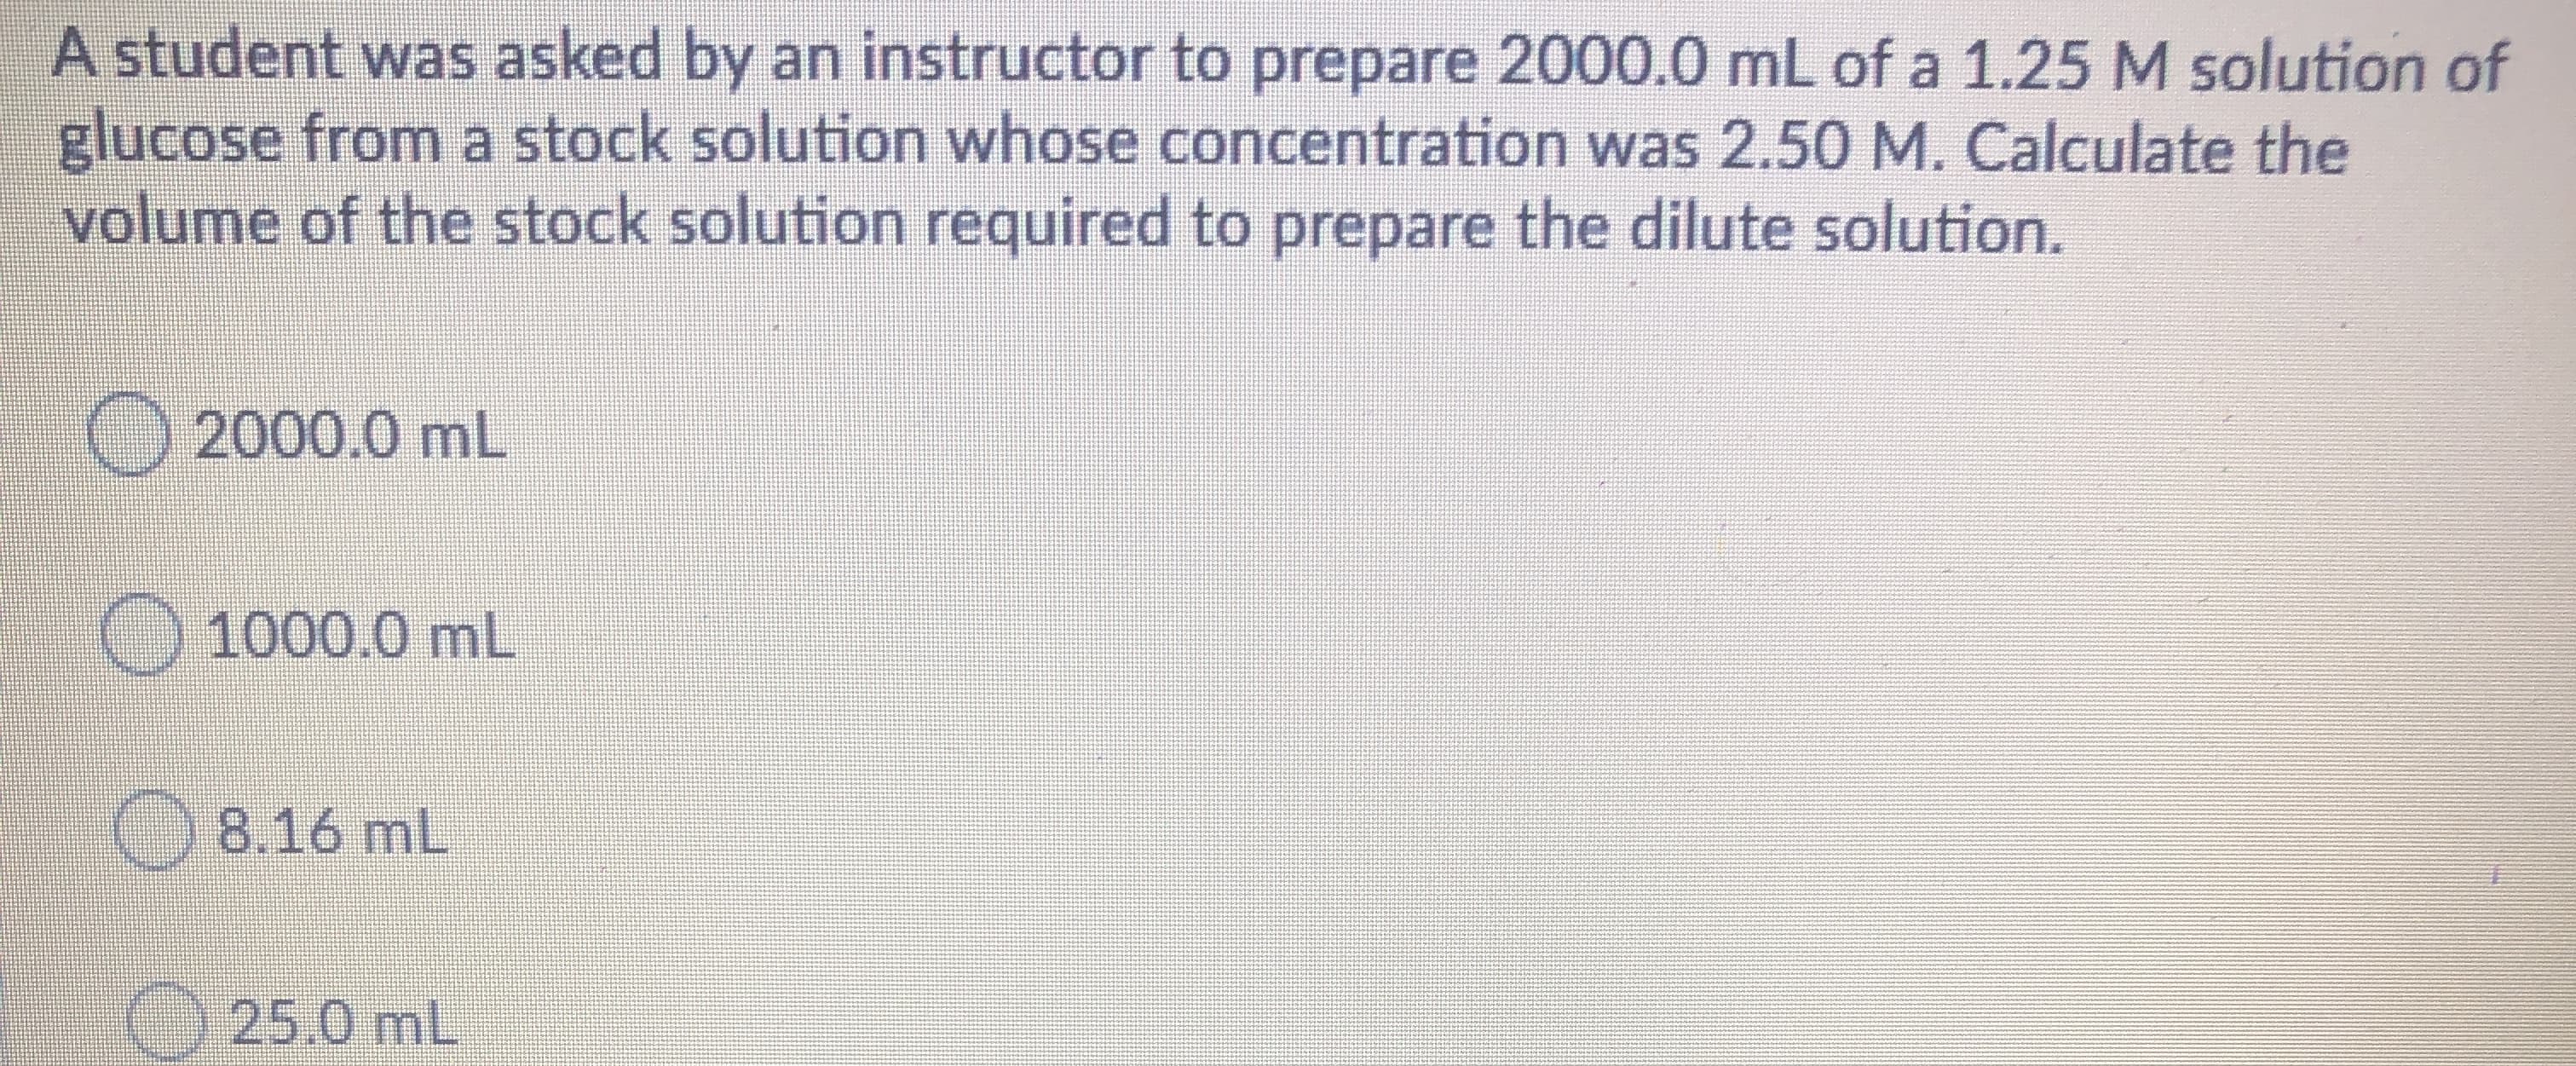 A student was asked by an instructor to prepare 2000.0 mL of a 1.25 M solution of
glucose from a stock solution whose concentration was 2.50 M. Calculate the
volume of the stock solution required to prepare the dilute solution.
2000.0 mL
O 1000.0 mL
8.16 mL
KO 25.0 mL
